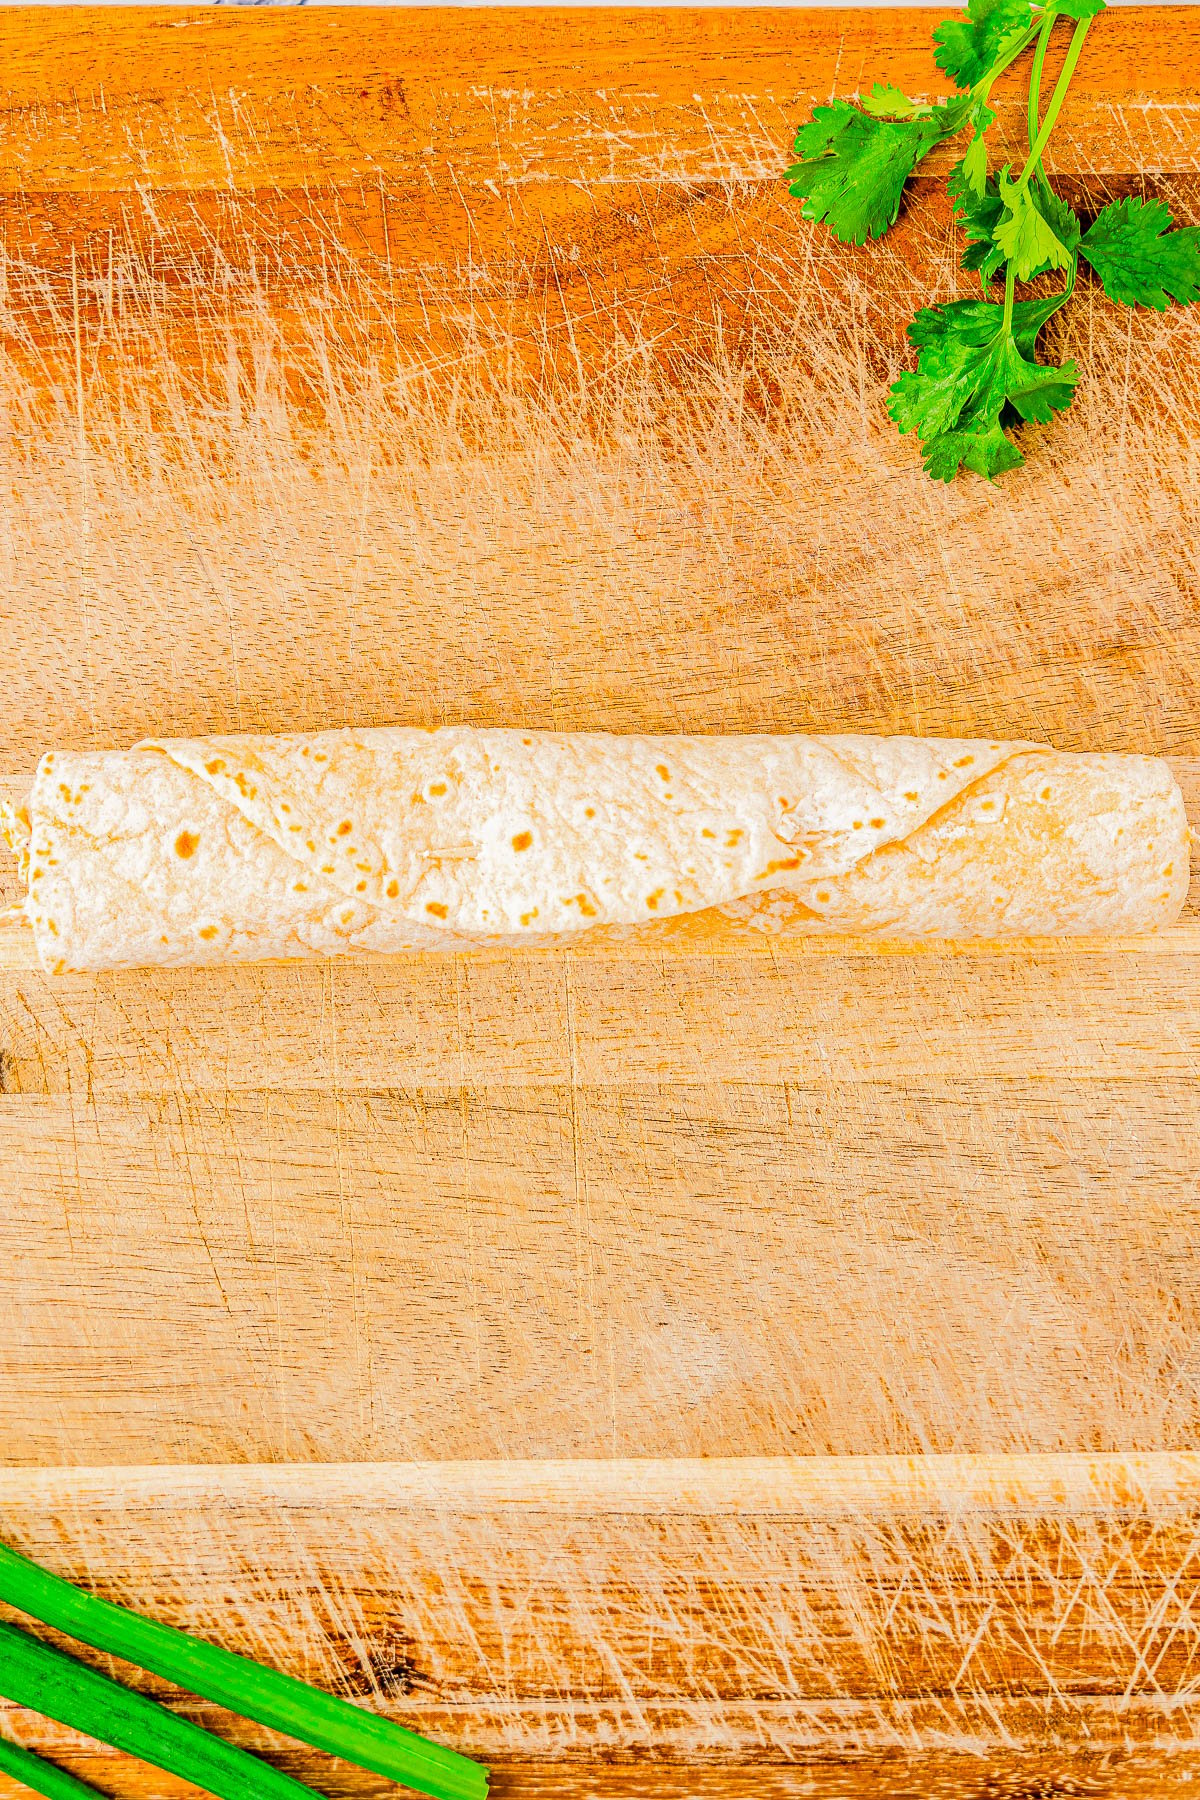 A single taquito on a wooden cutting board, garnished with cilantro and green onions.